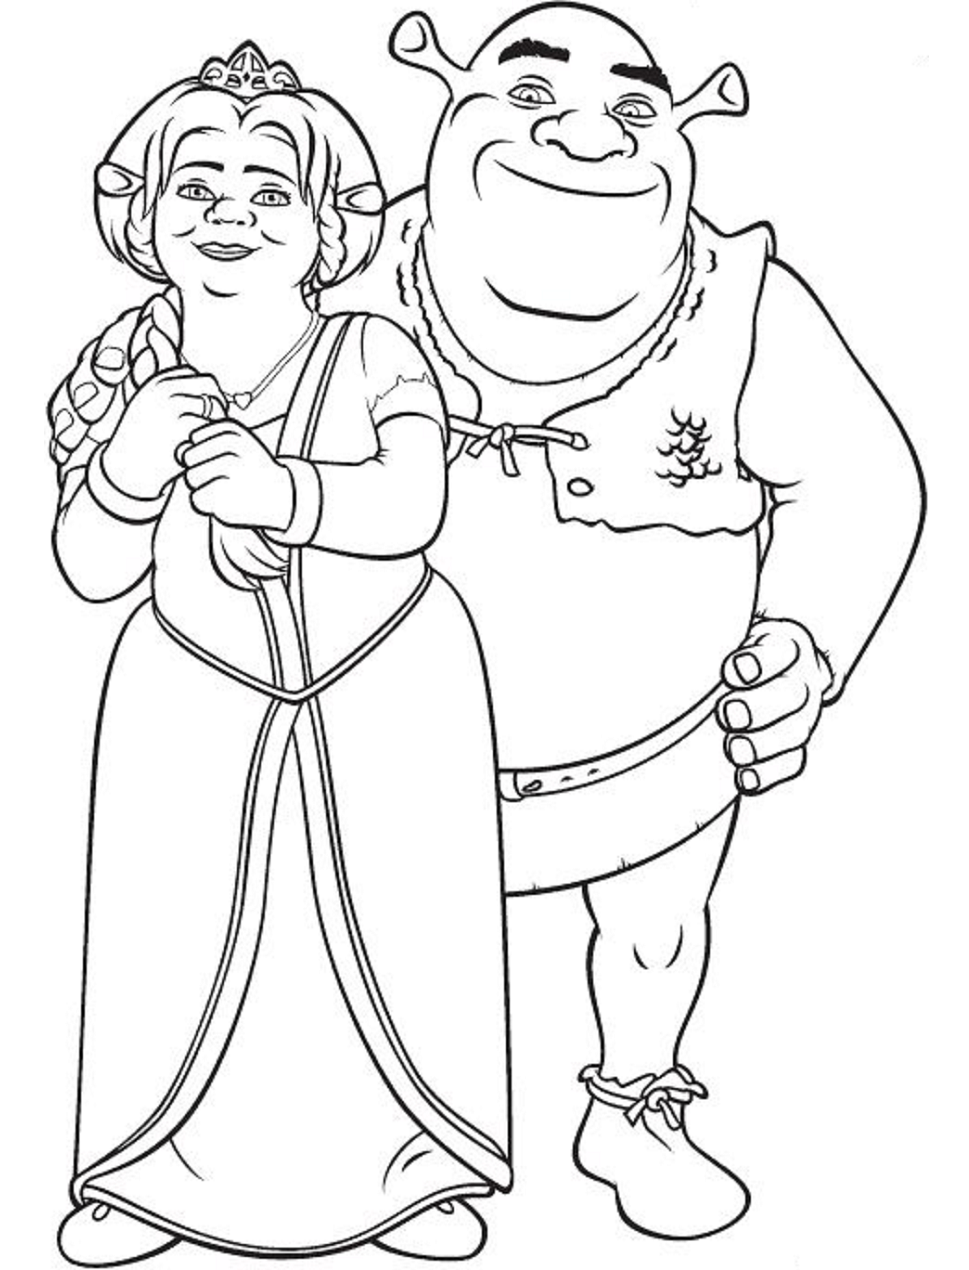 Shrek And Fiona Coloring Pages